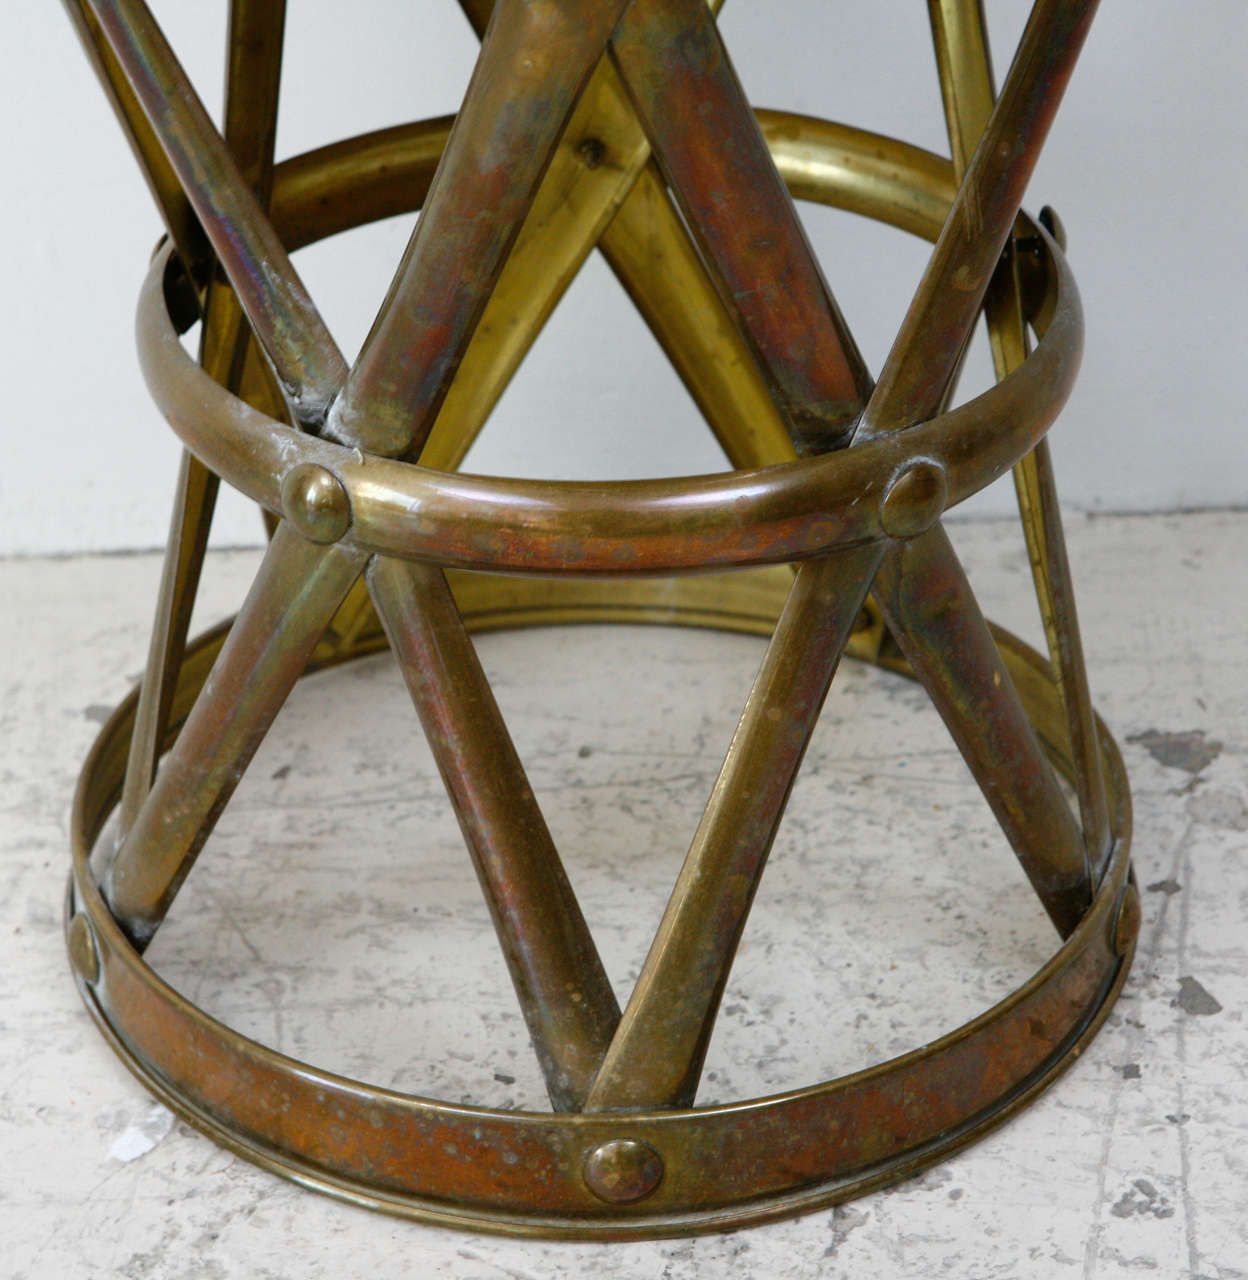 Vintage Brass Drum Stool At 1stdibs Pertaining To Espresso Antique Brass Stools (View 9 of 20)